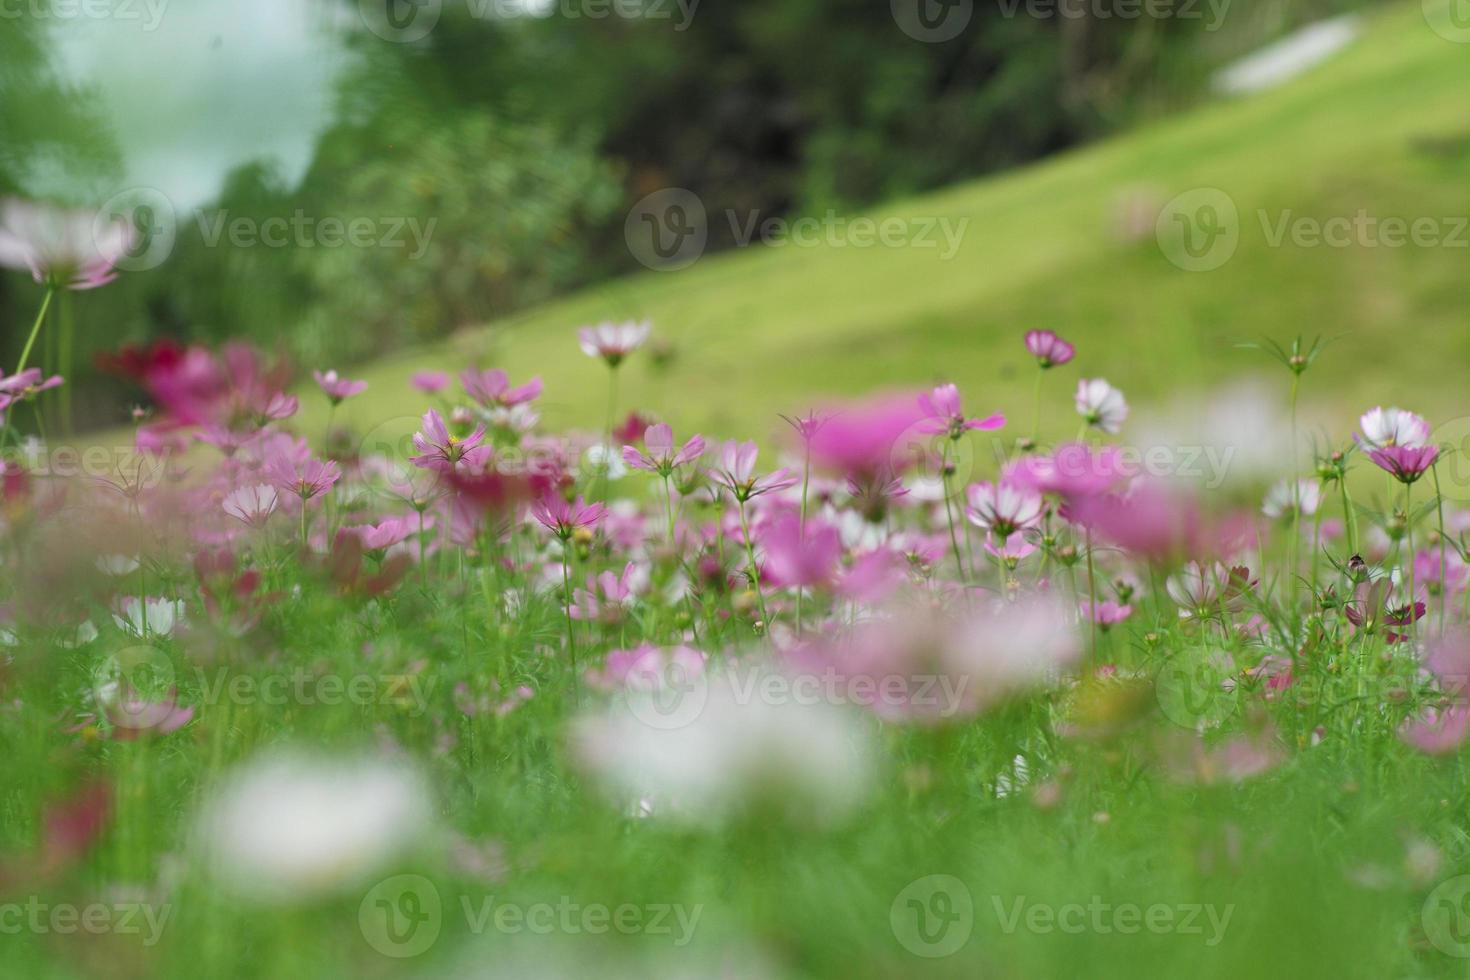 Selective focus on the blossom daisy flowers grow among the crowded of blooming flowers in the field photo